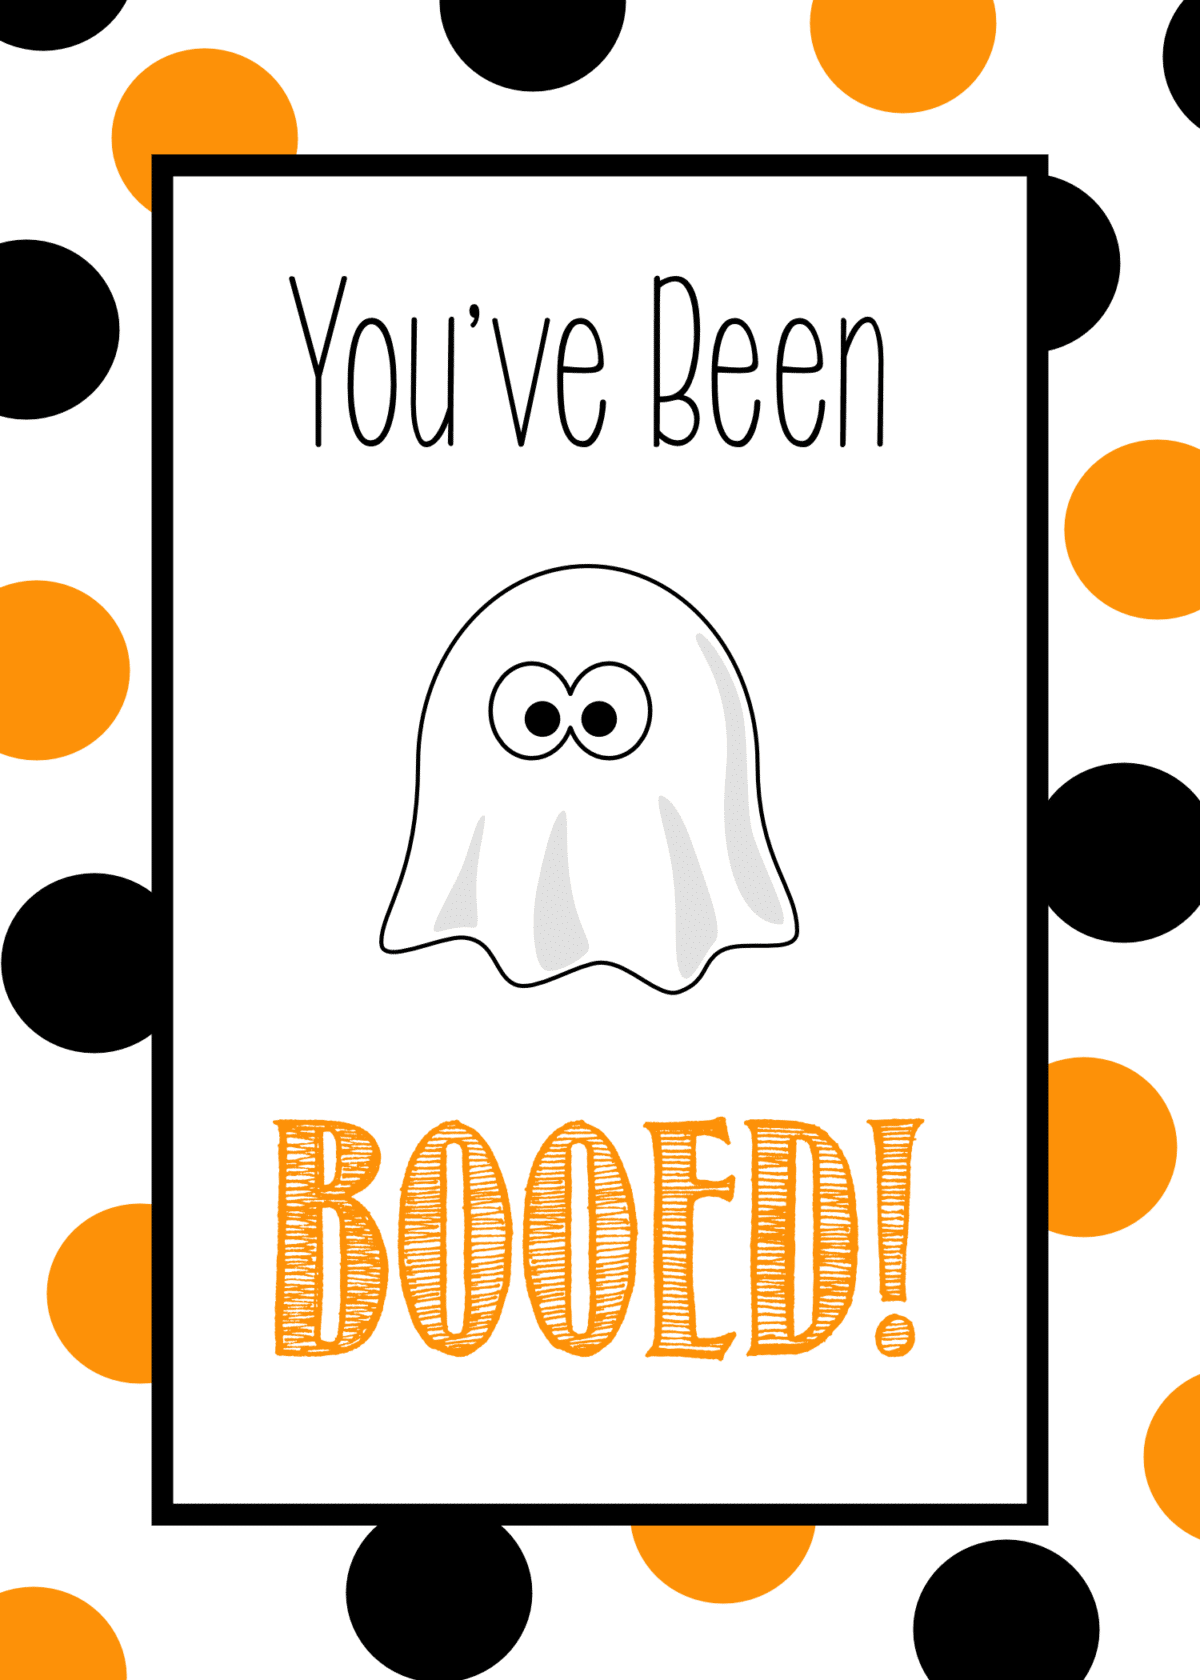 How to Make a Boo Kit to Spread Halloween Cheer